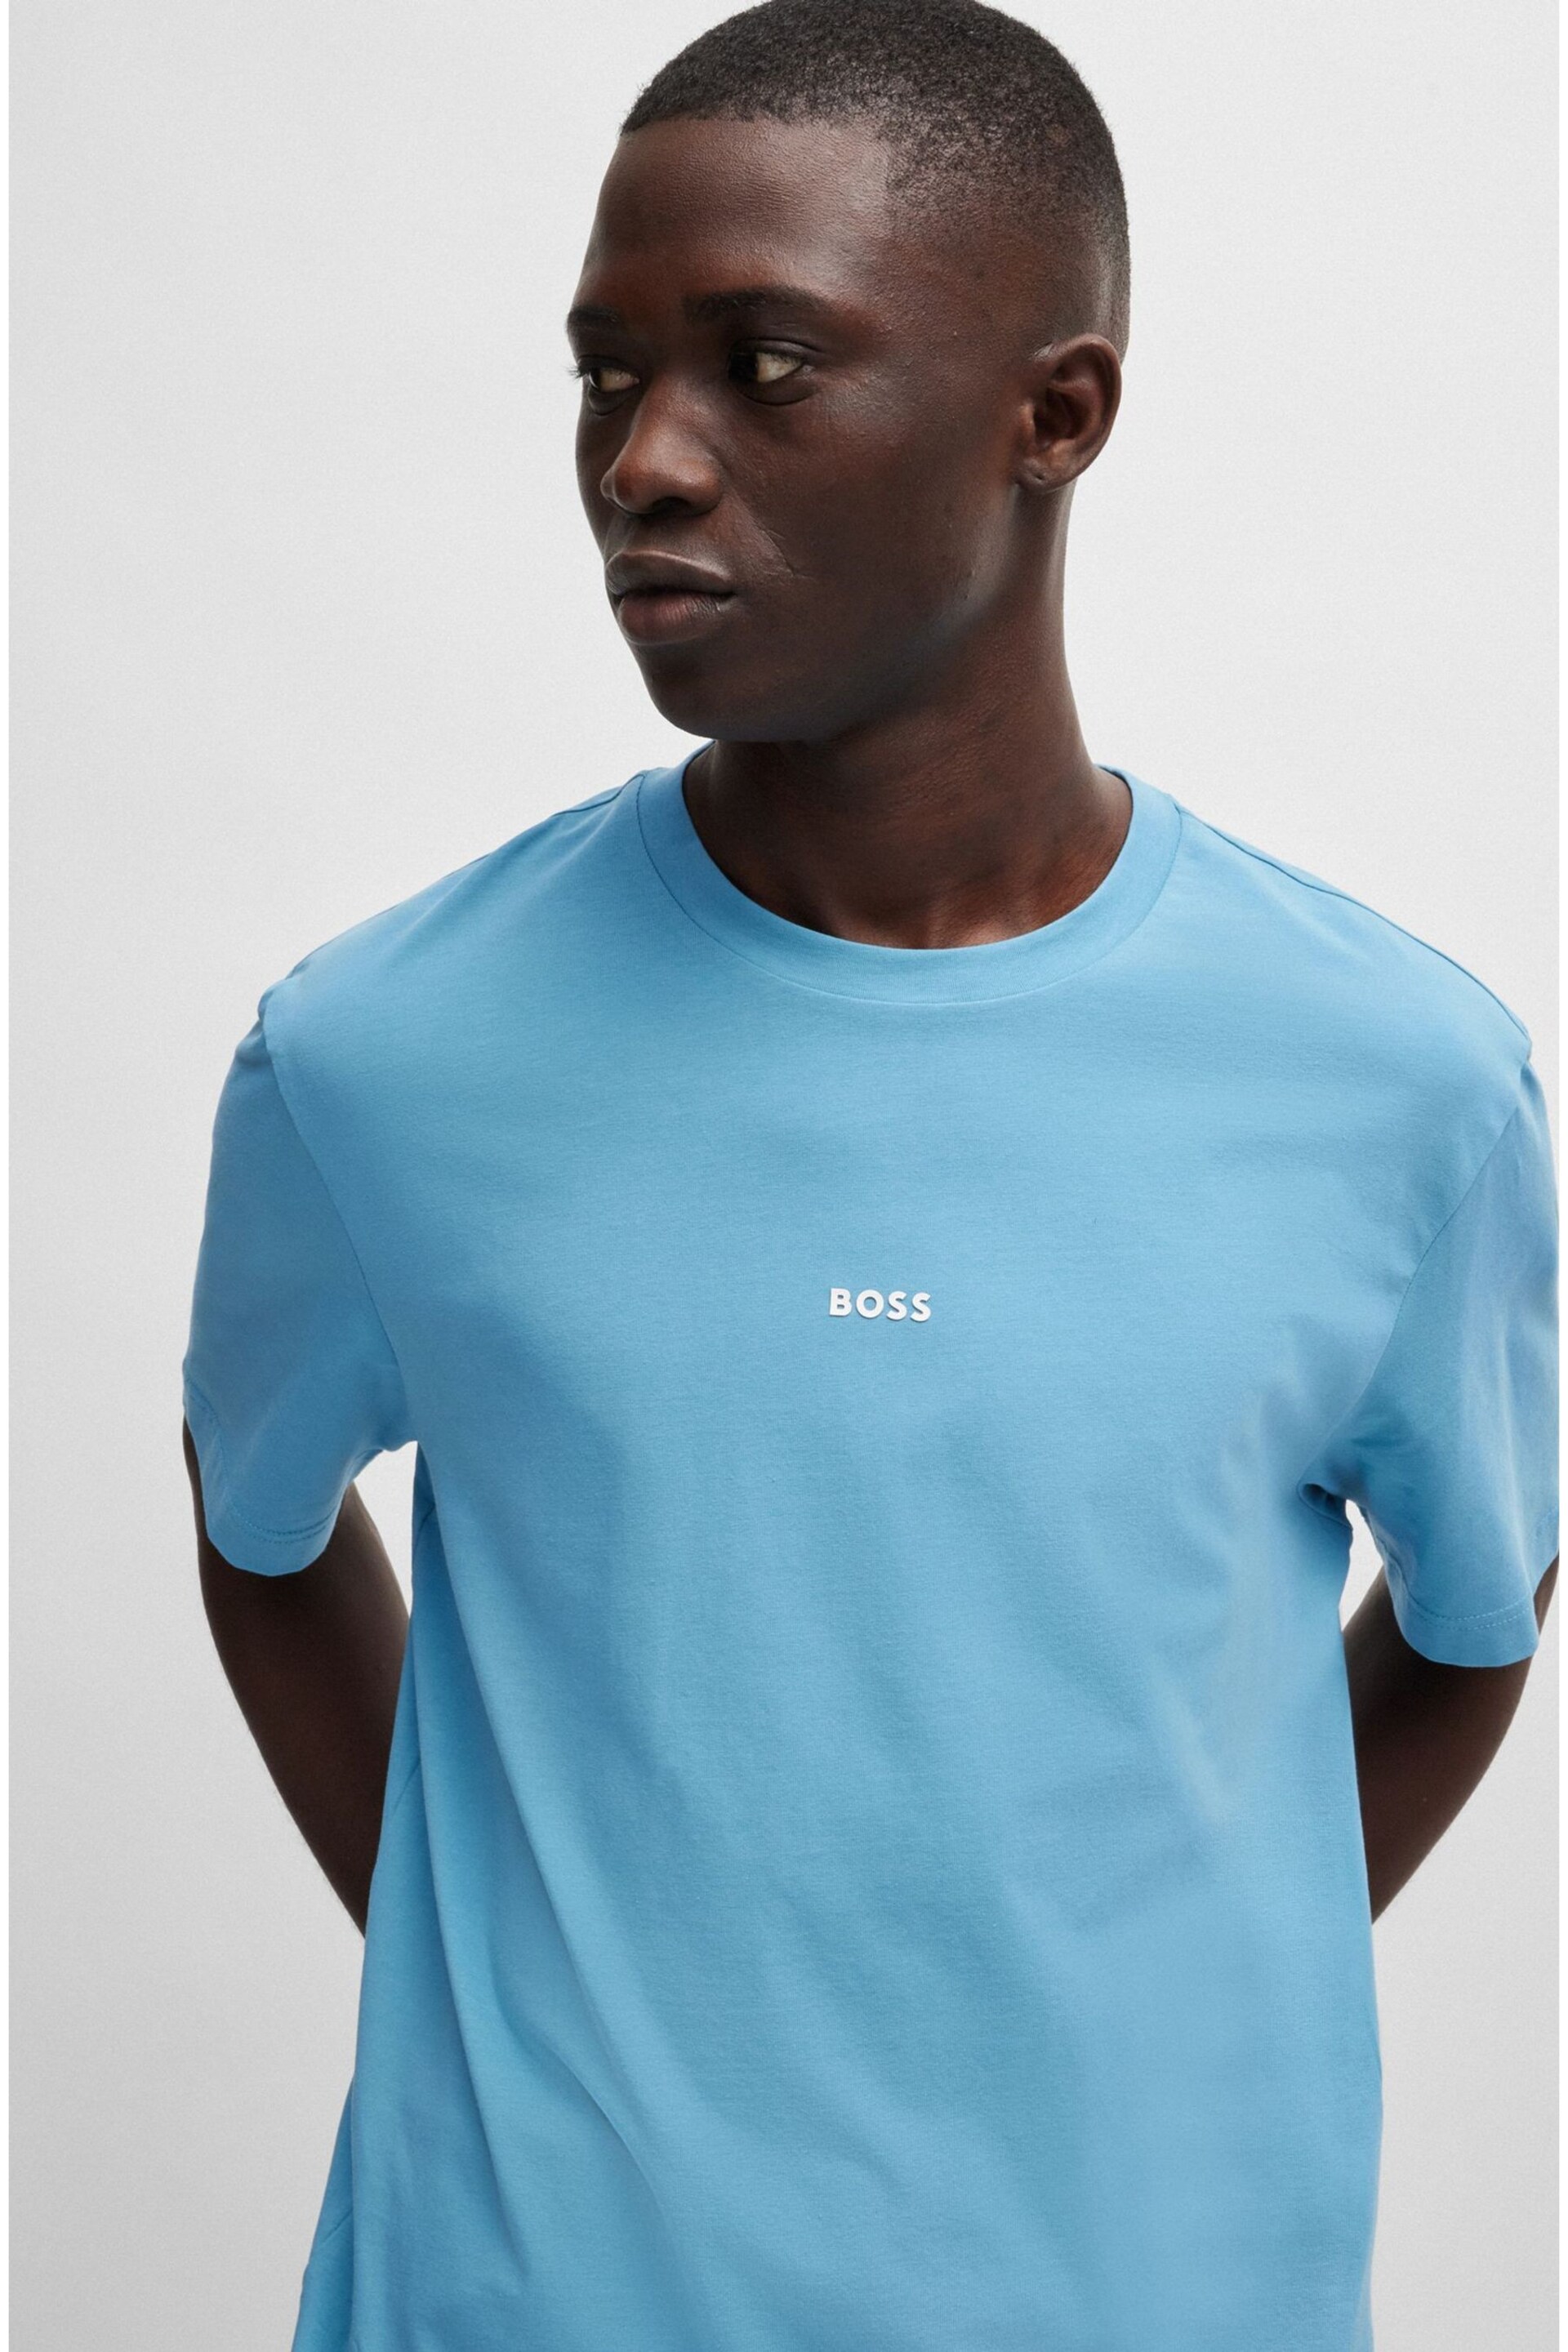 BOSS Blue Relaxed-Fit T-Shirt in Stretch Cotton With Logo Print - Image 3 of 5